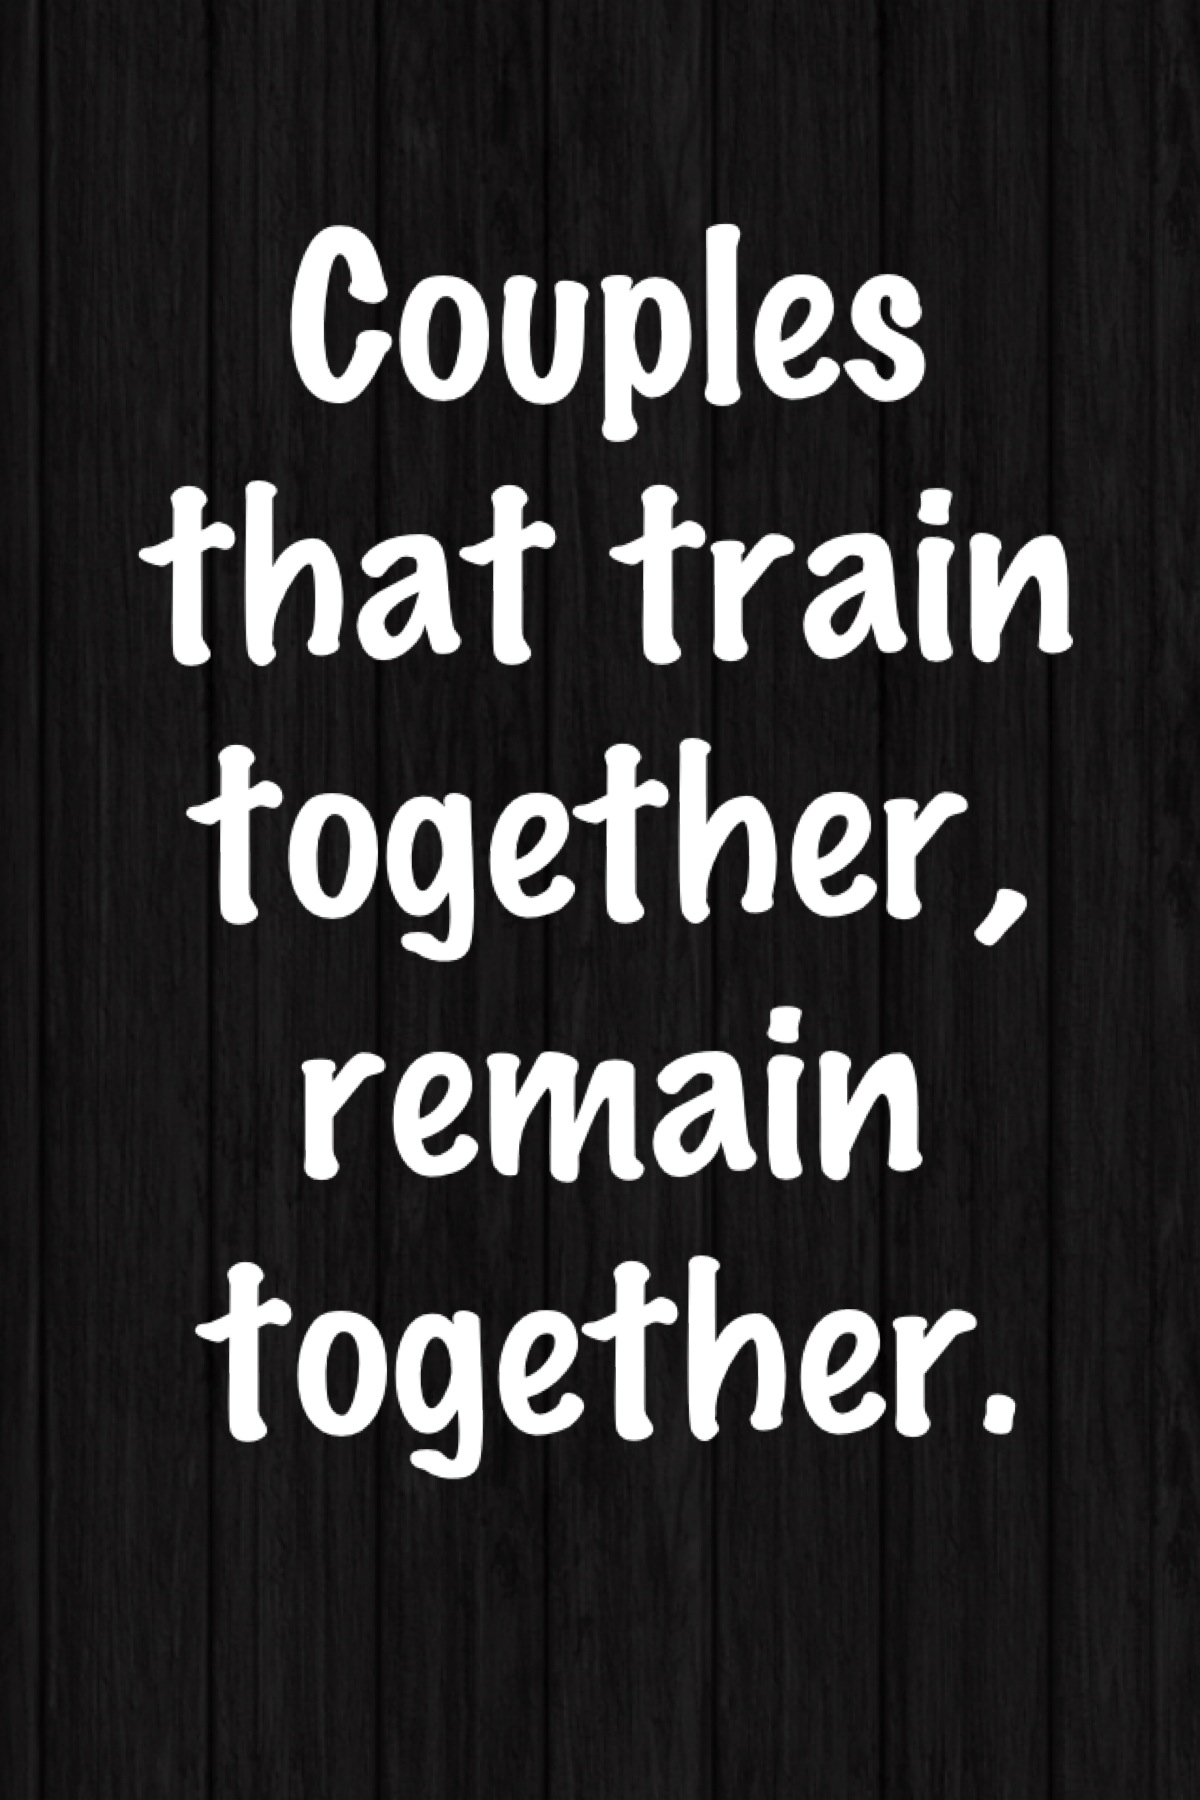 15 Minute Couples that workout together quotes 